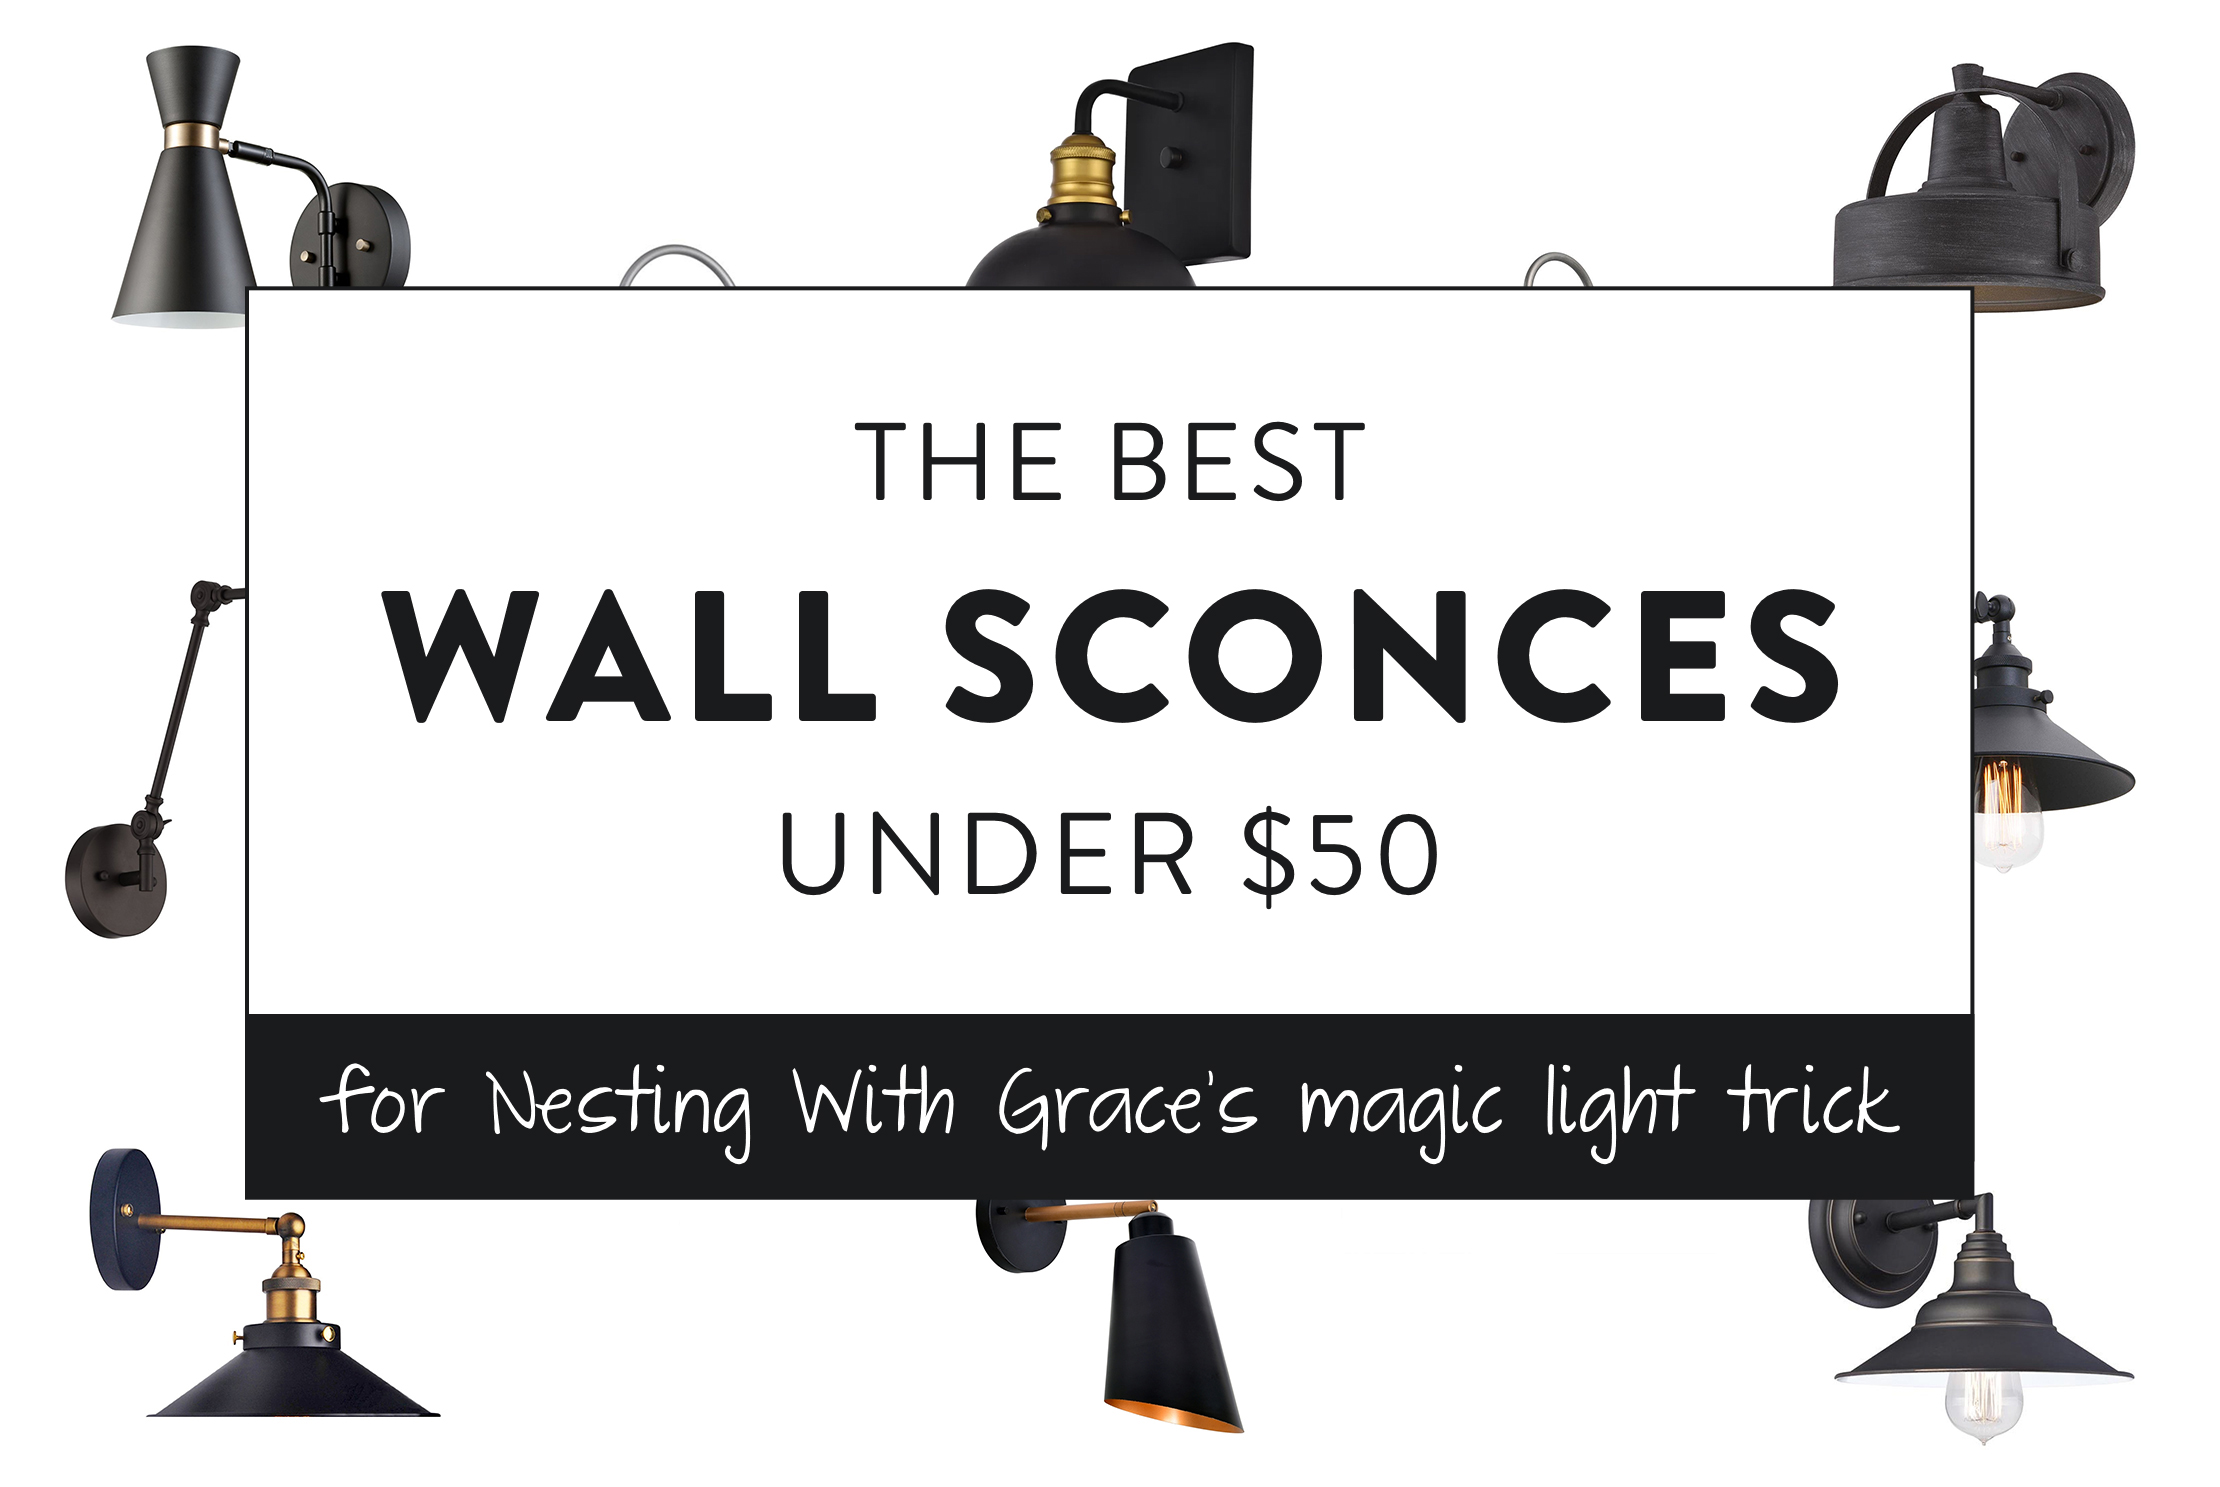 The best wall sconces under $50